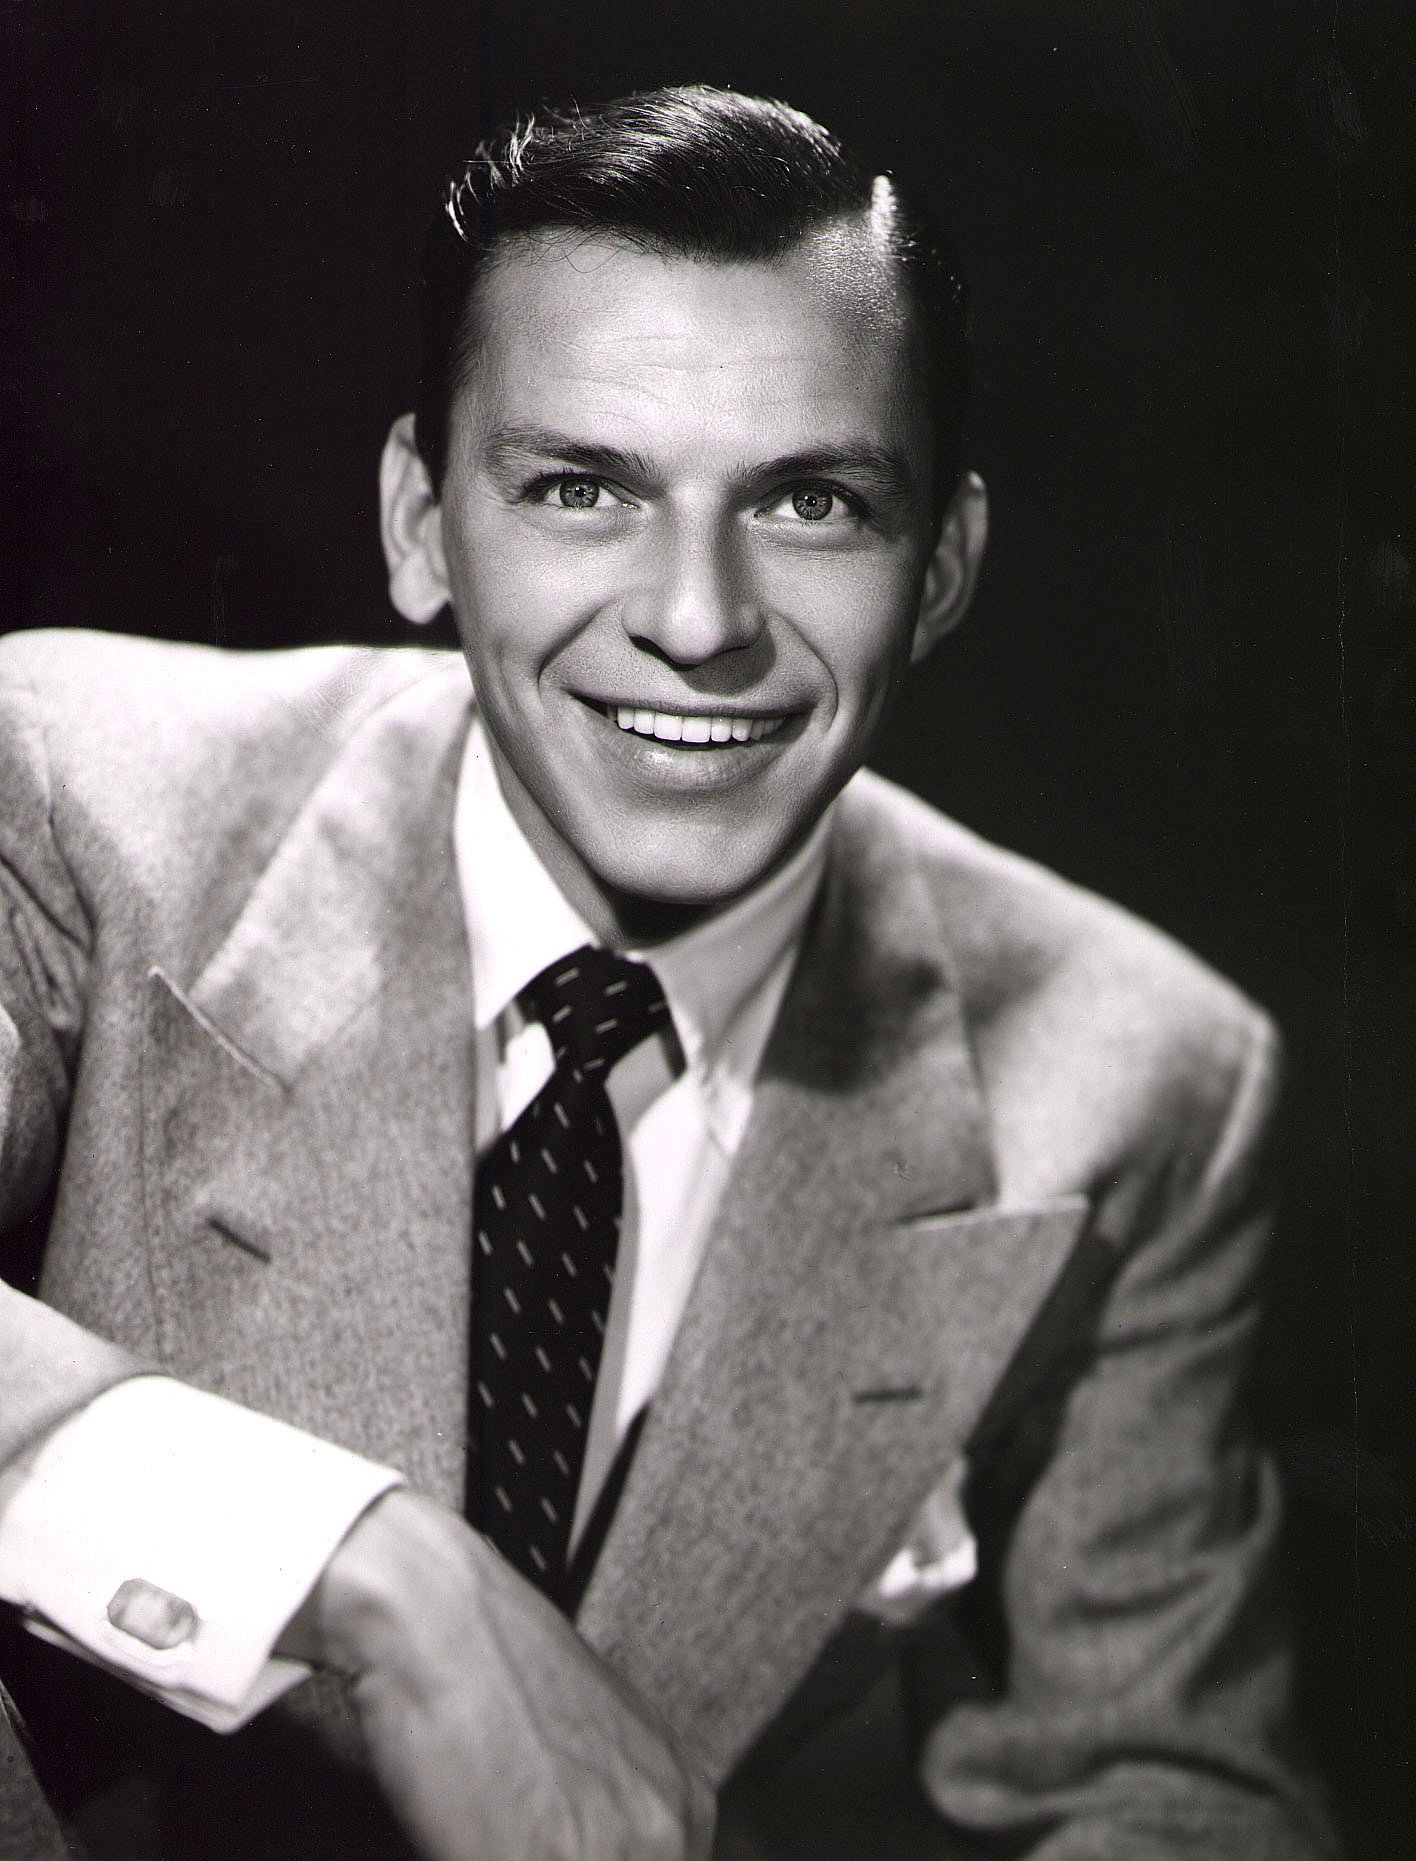 Studio portrait of Frank Sinatra during the 1950s | Photo: Getty Images